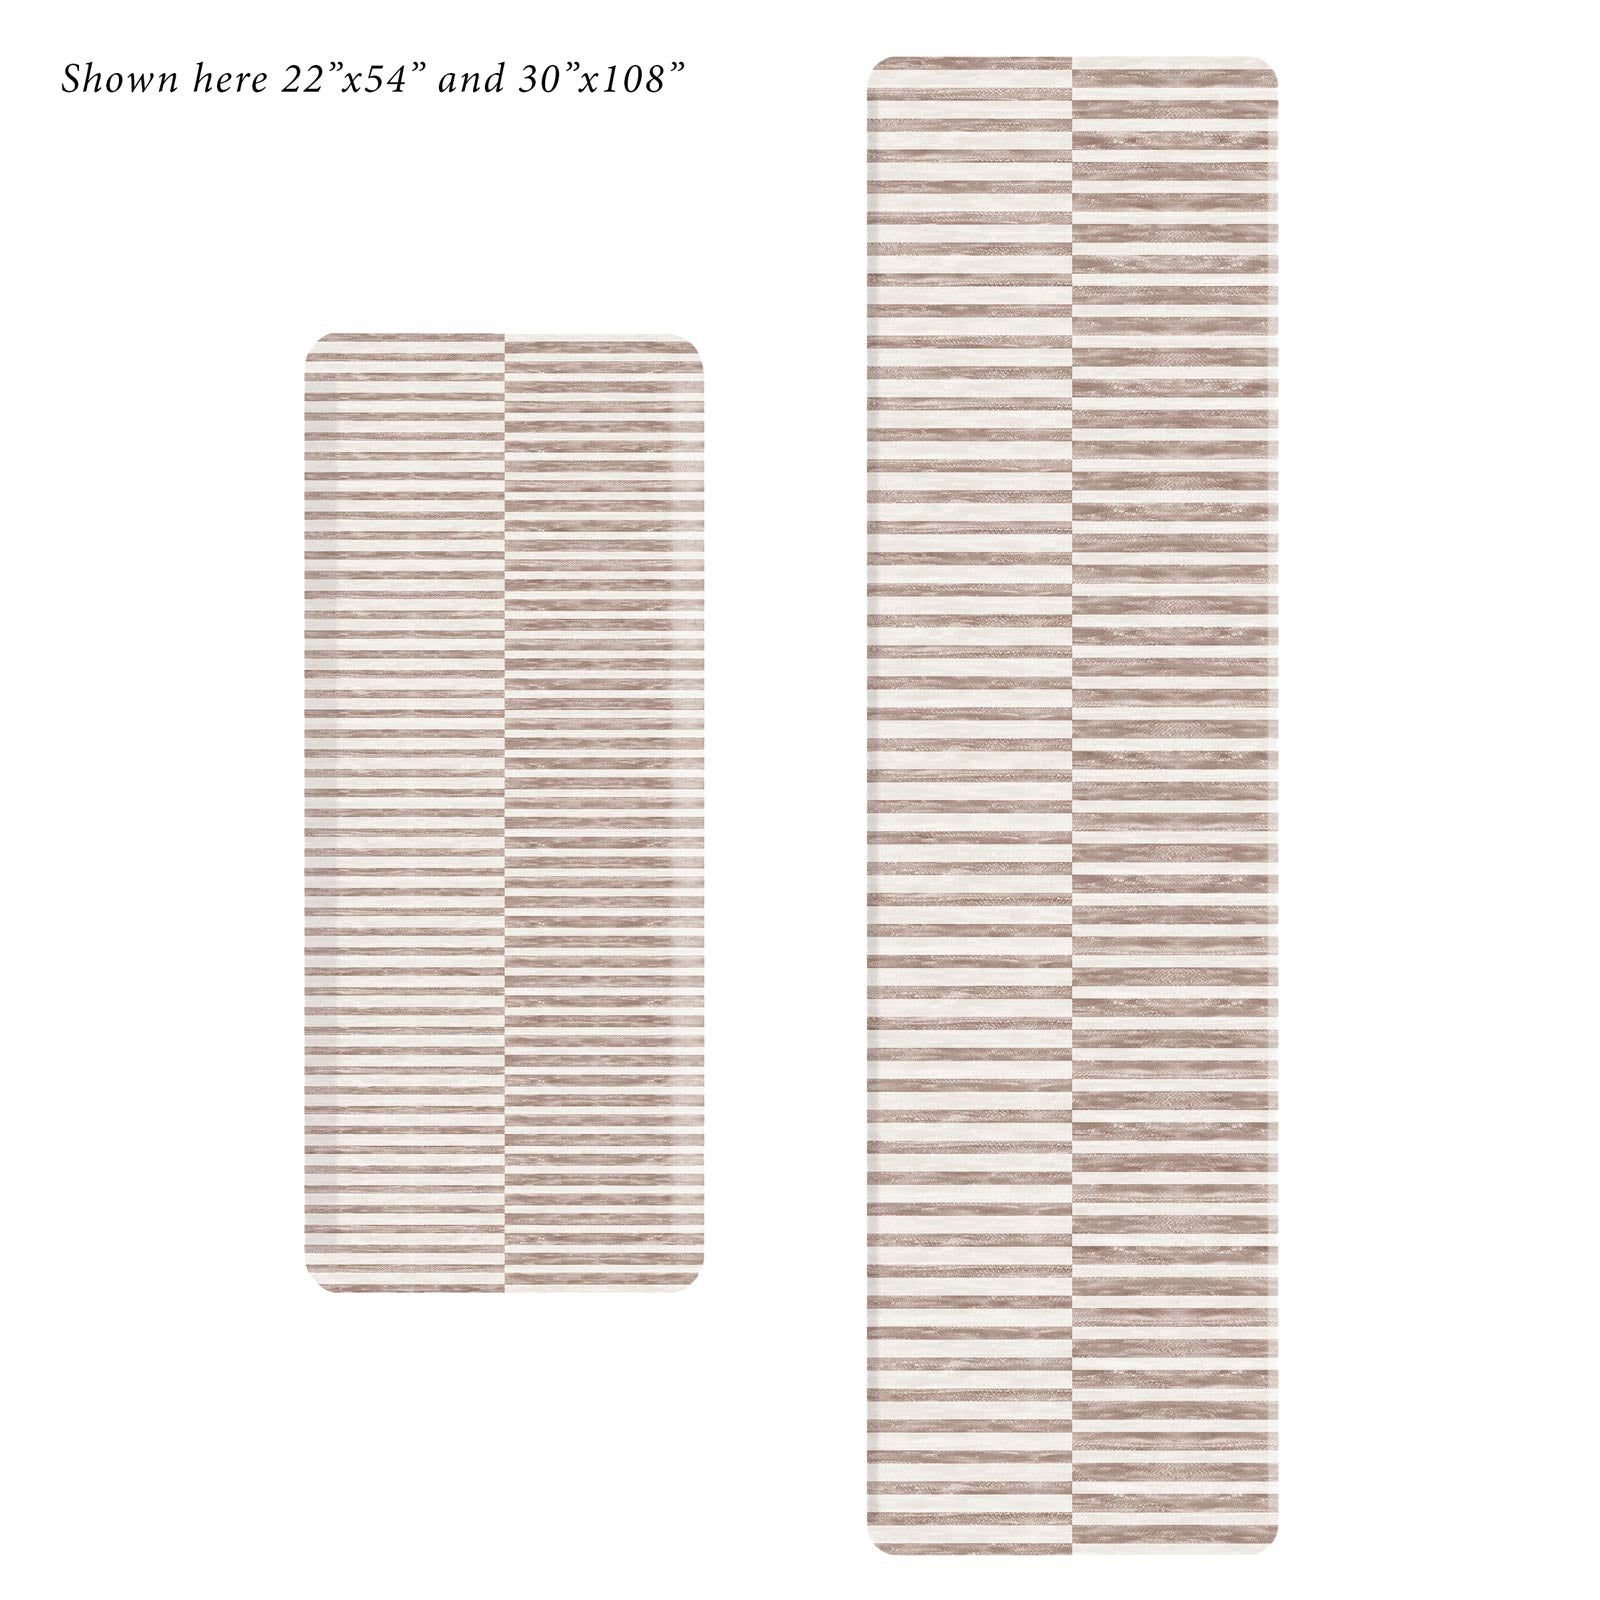 Reese chai beige and white inverted stripe standing mat shown in sizes 22x54 and 30x108